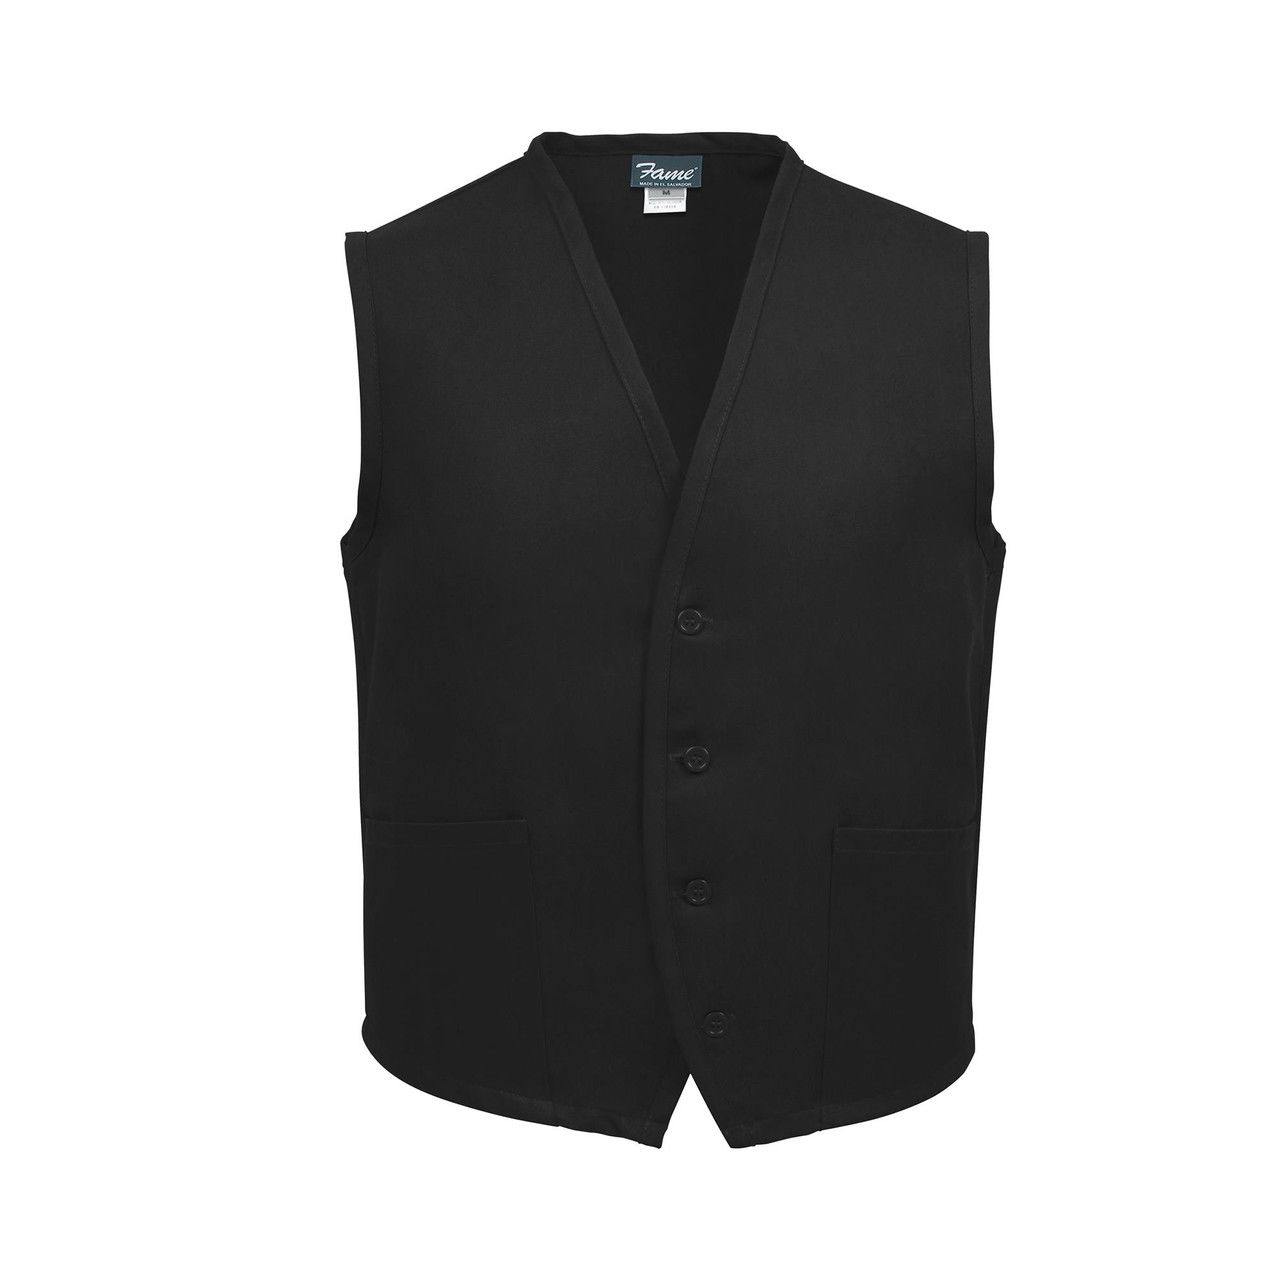 Is the black uniform vest shipped from a professional unisex location?